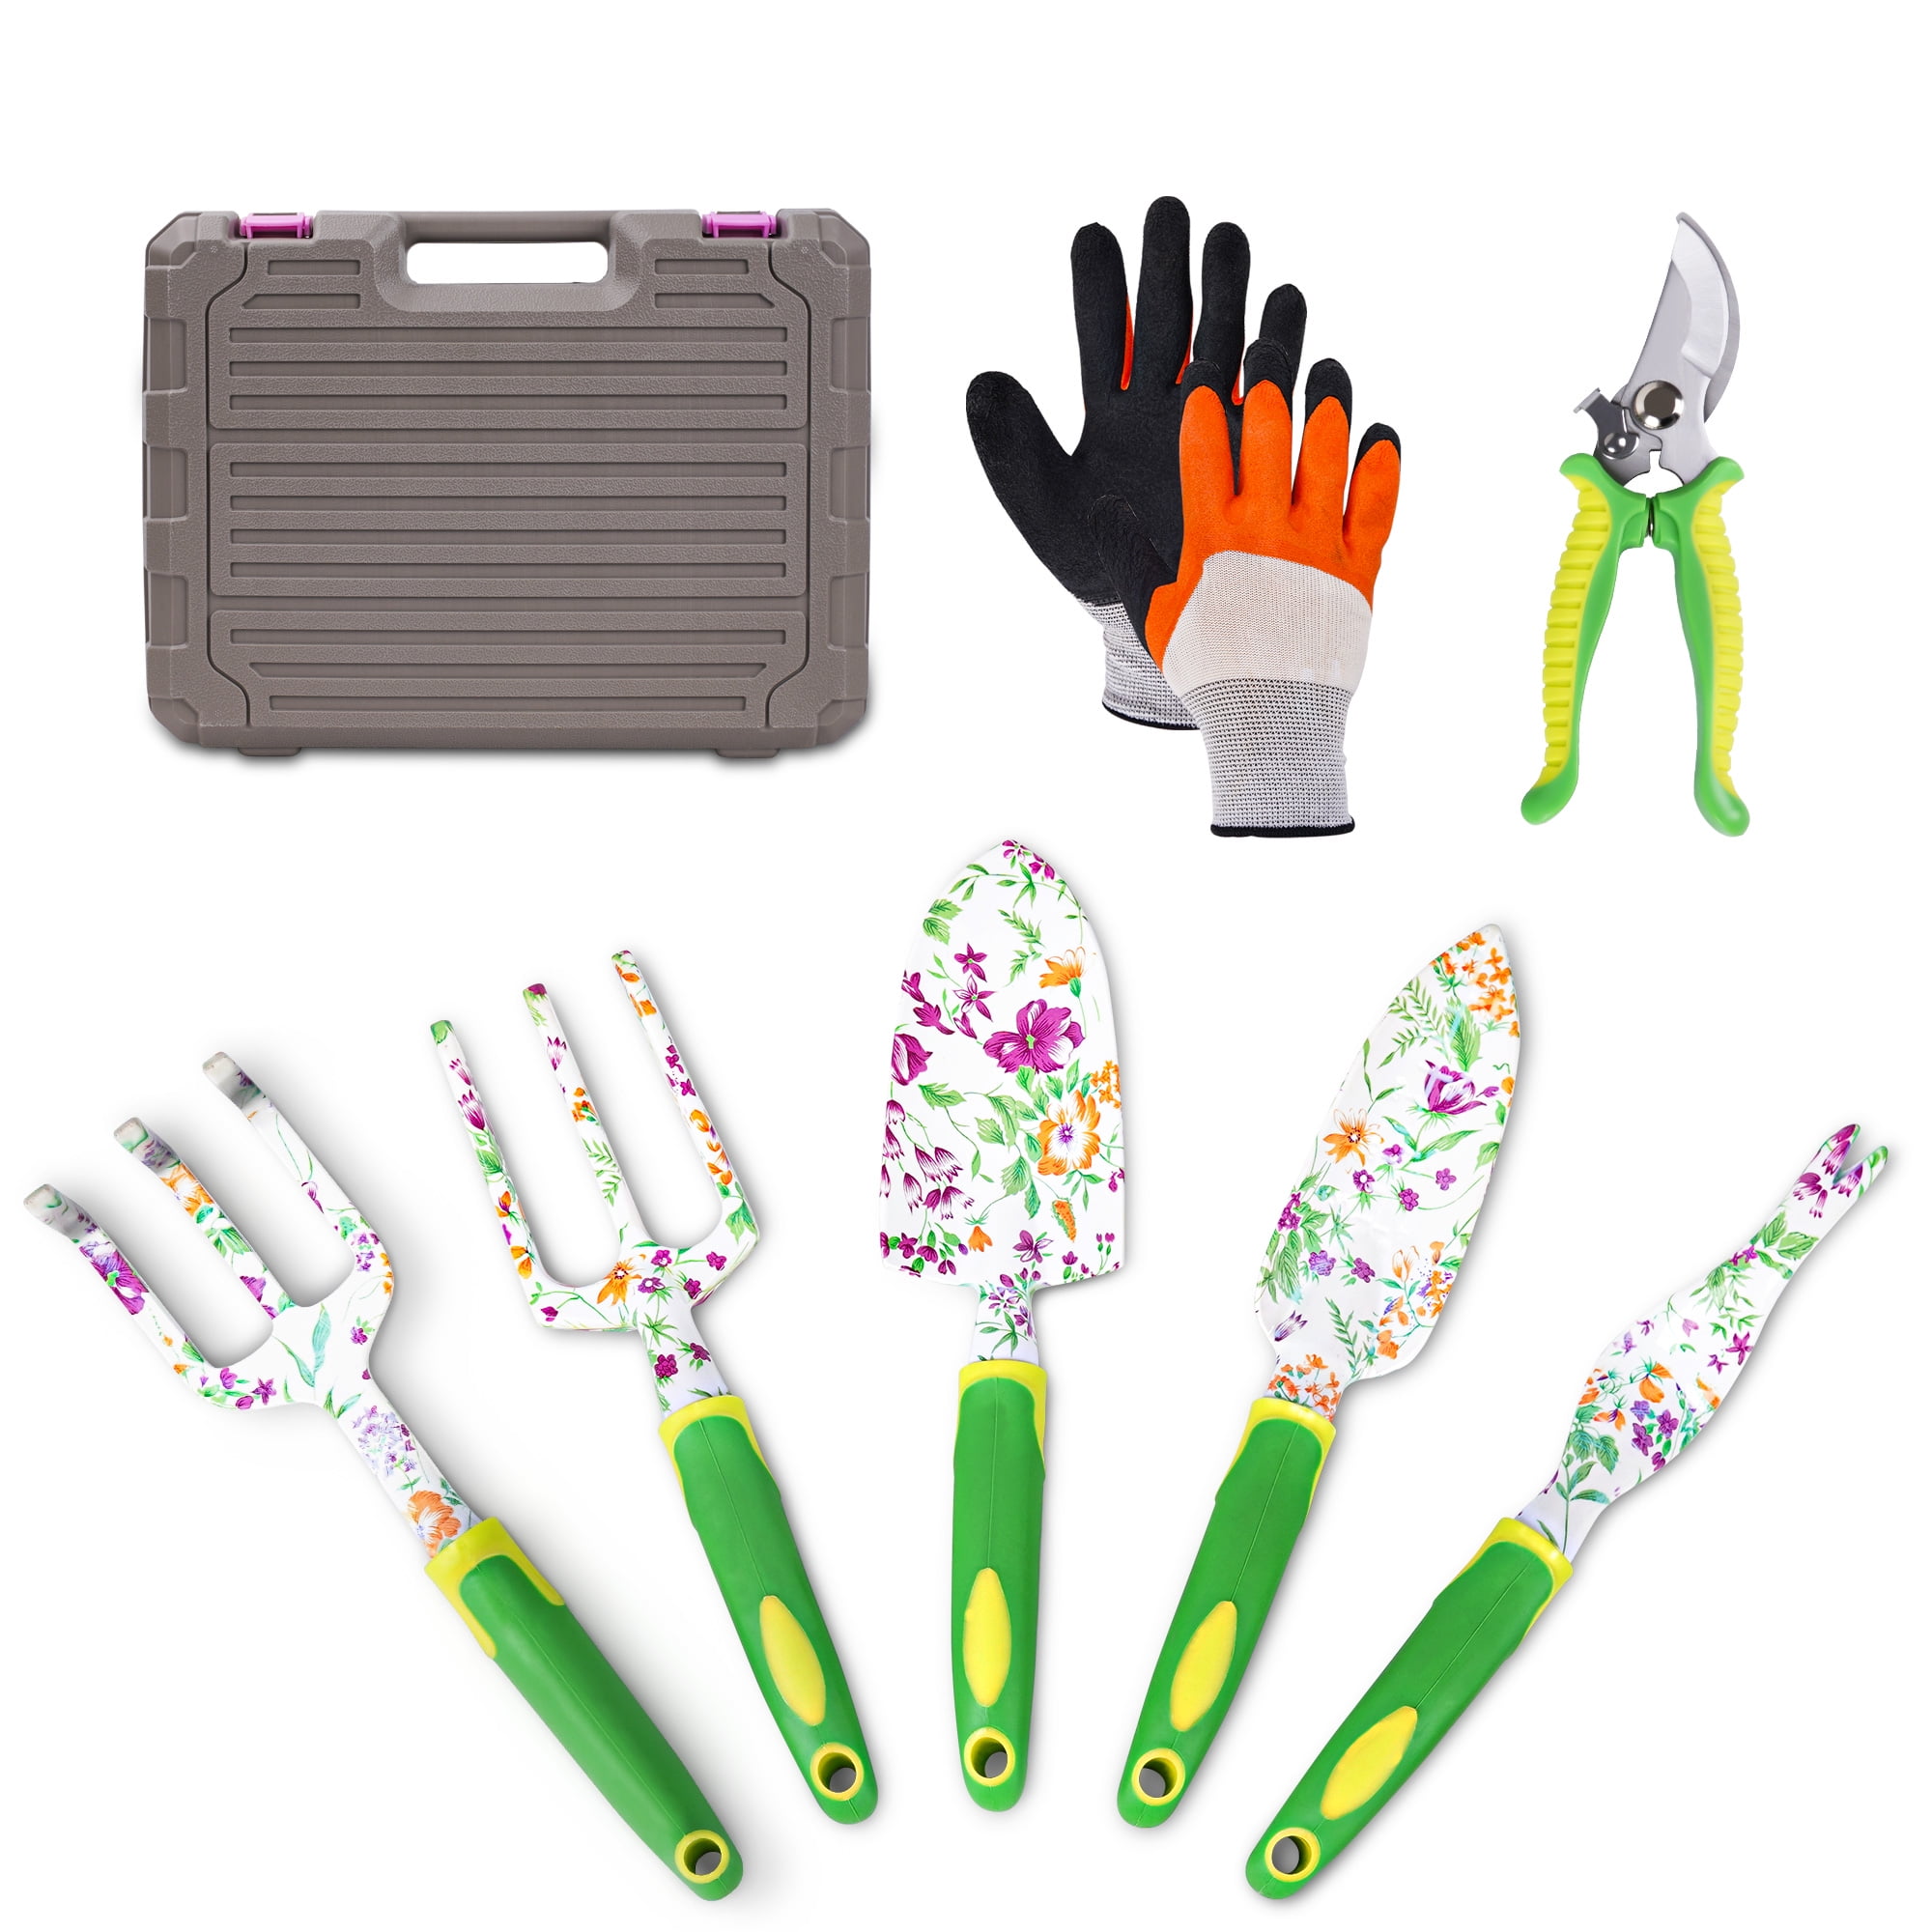 Kate Spade New York 2 Piece Gardening Hand Tools, Cute Garden Tool Set  Includes Hand Rake and Trowel, Picture Dot